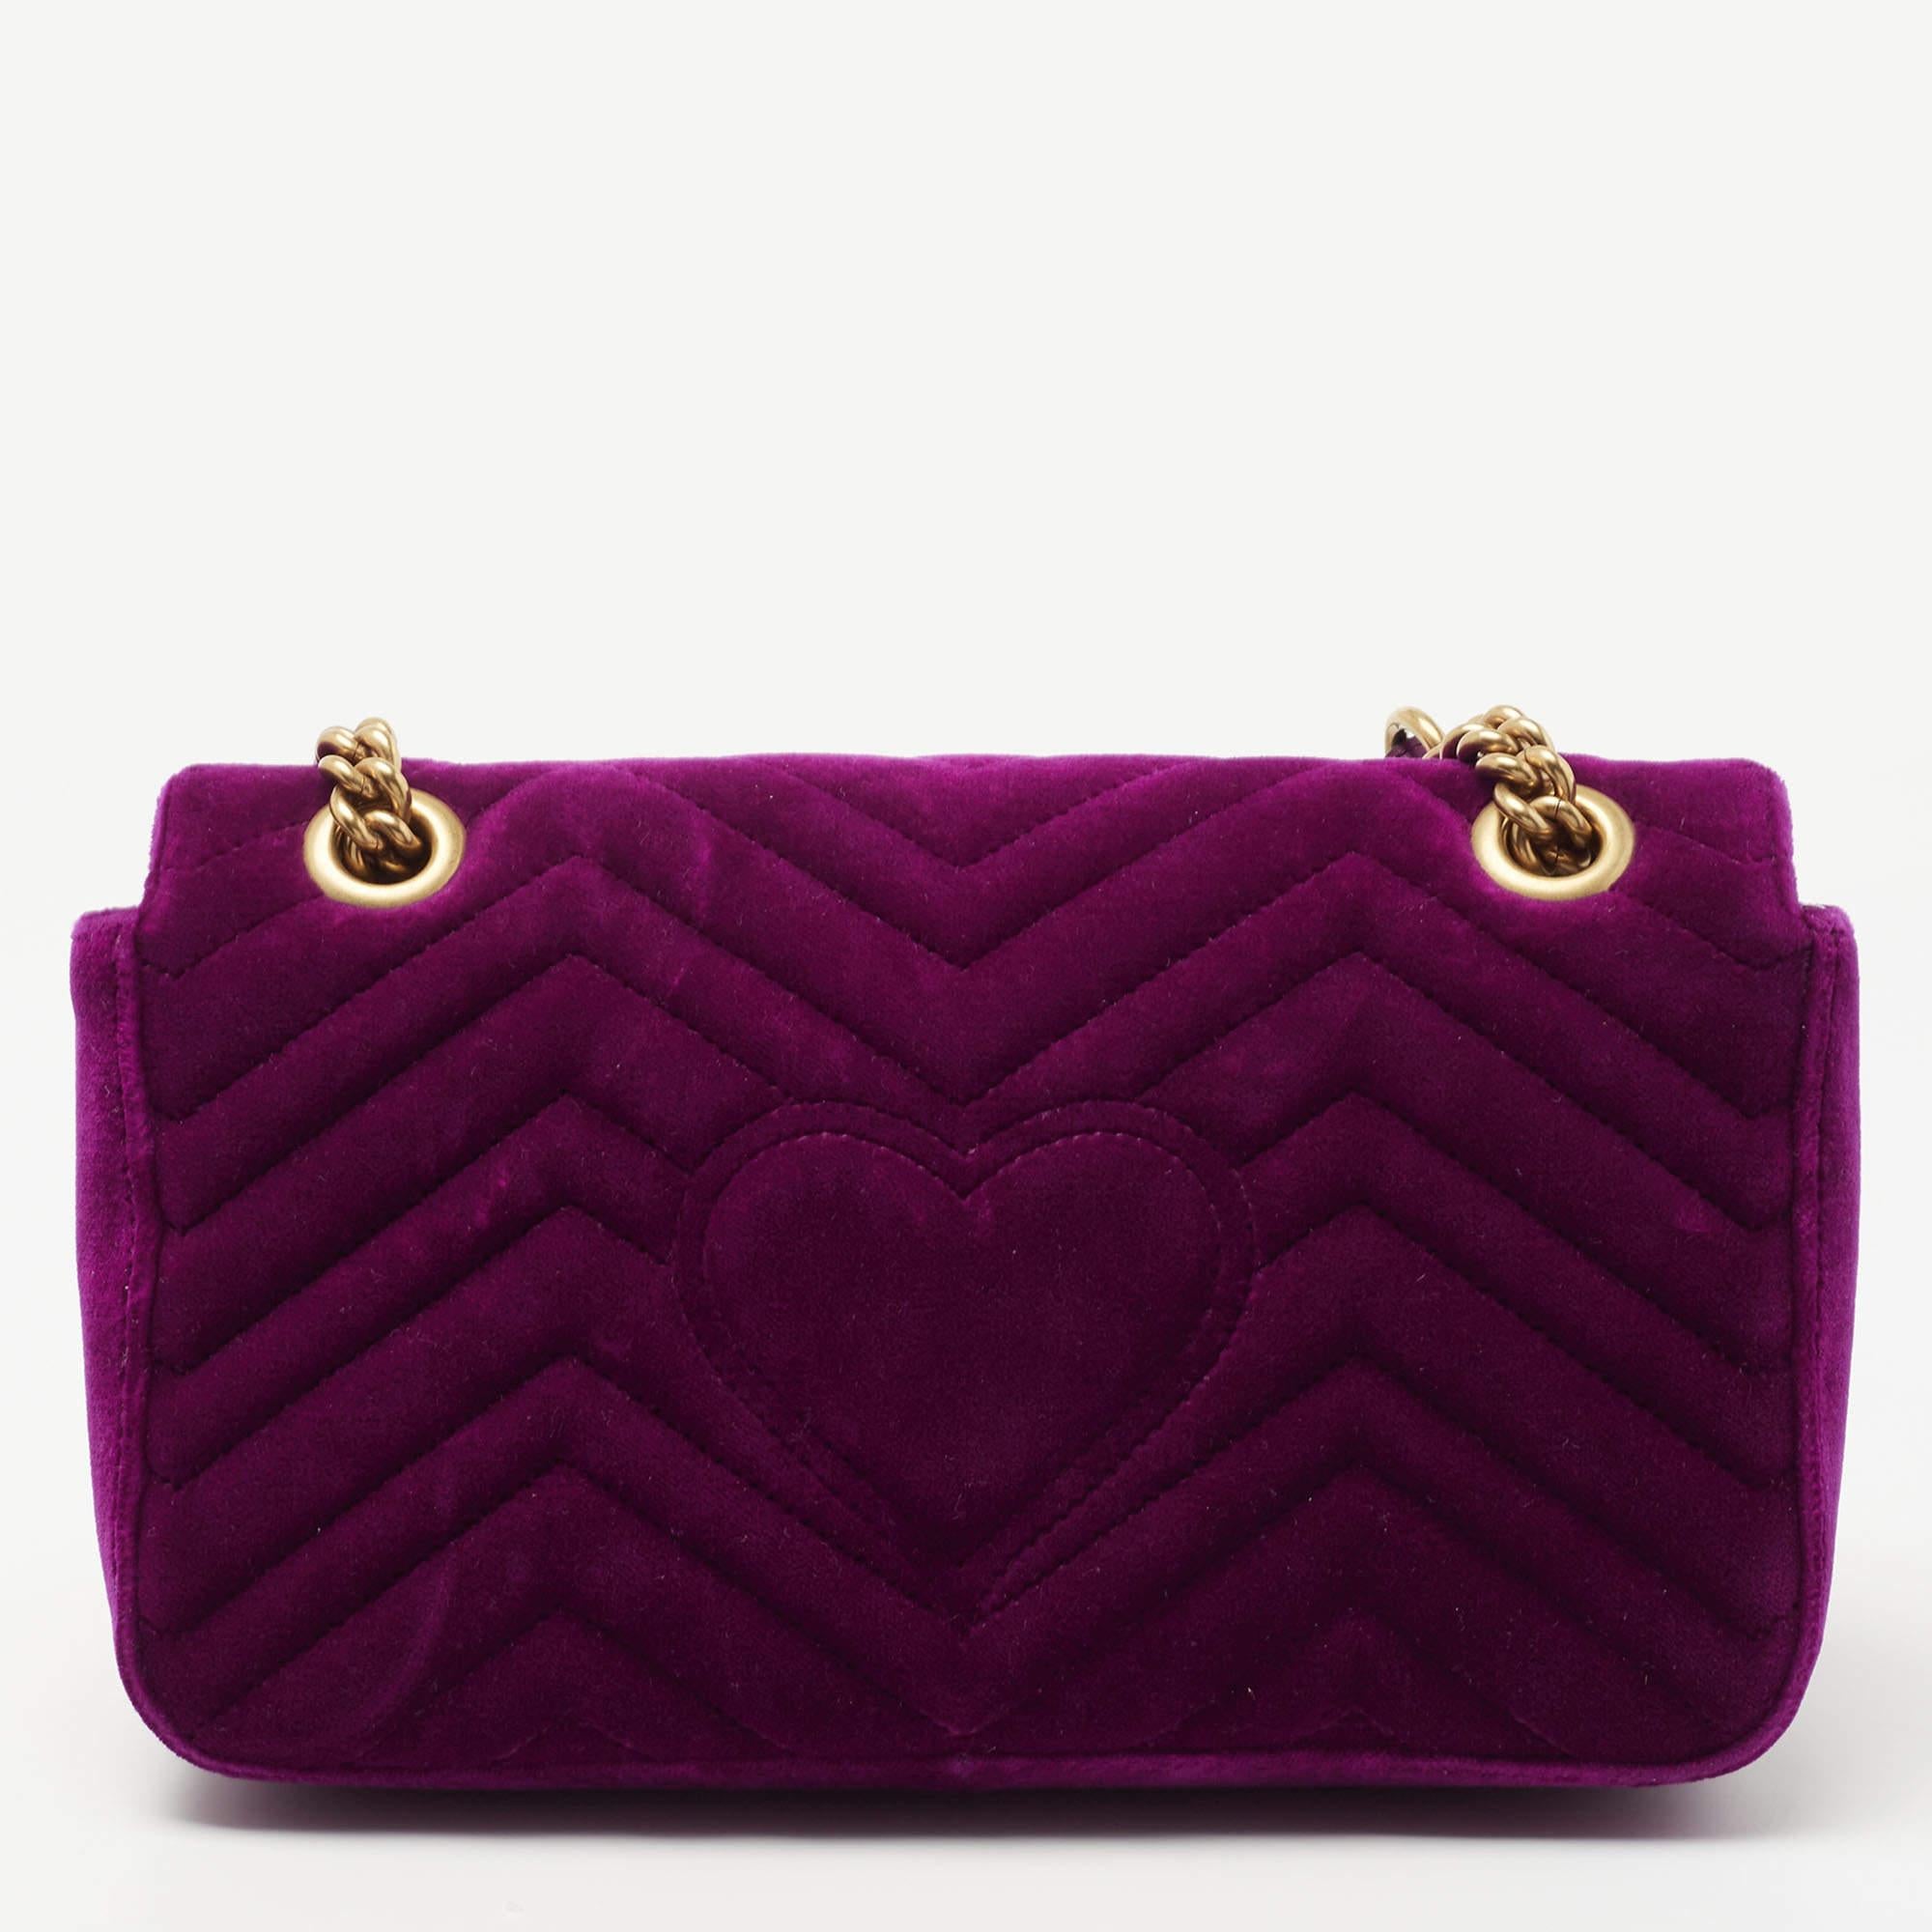 The GG Marmont range of designs by Gucci has gained such wide popularity around the world. It's time you update your wardrobe with a piece from that range. This bag comes made from matelassé velvet in magenta and is detailed with the Double G logo